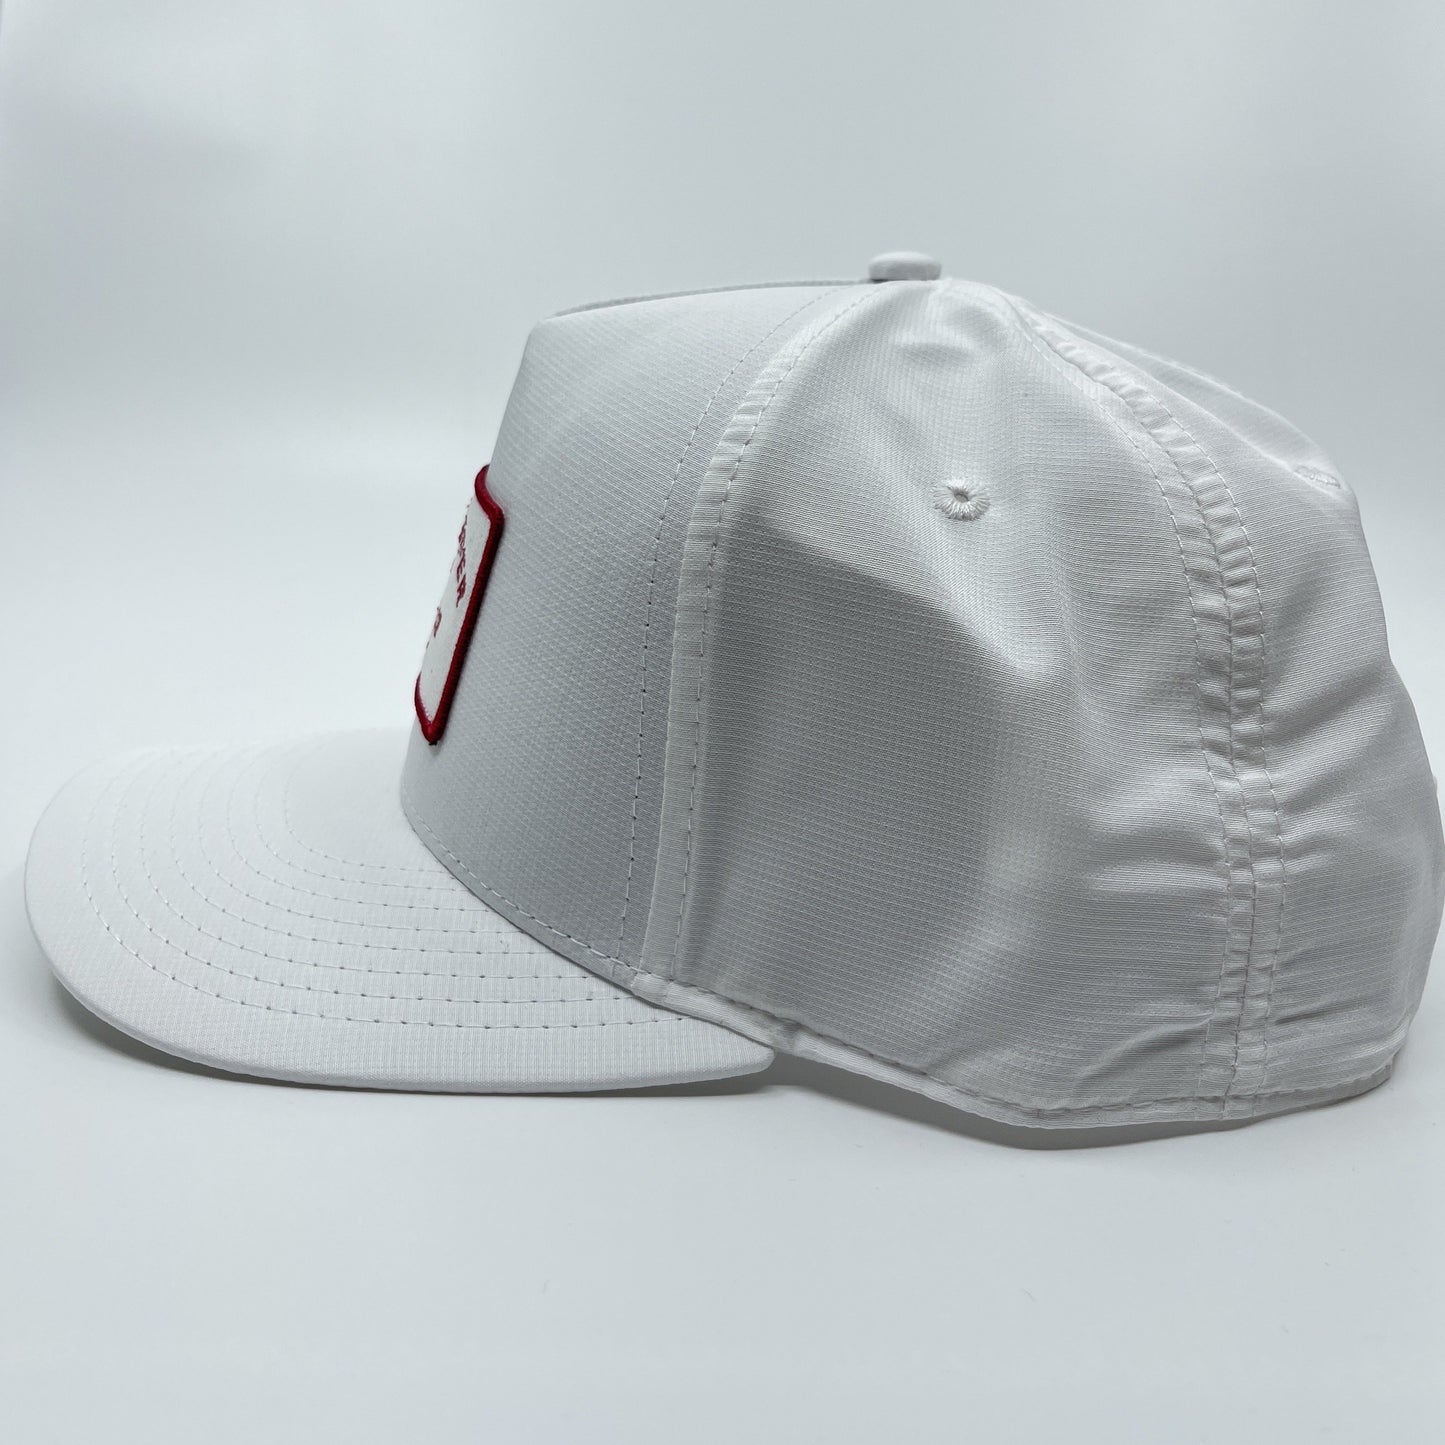 Goosekeeper Patch Trucker Cap WHITE with White patch